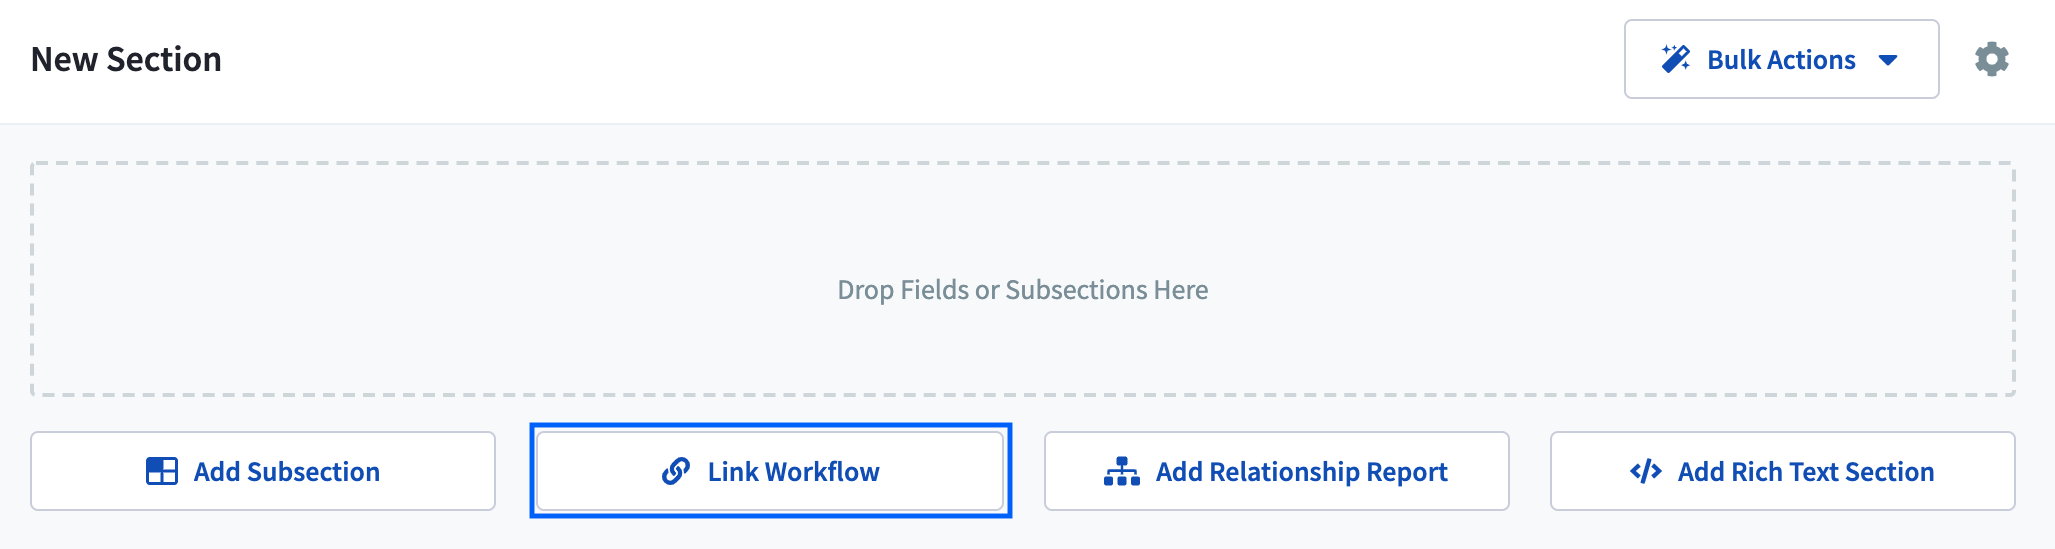 New_Section_Link_Workflow_.png